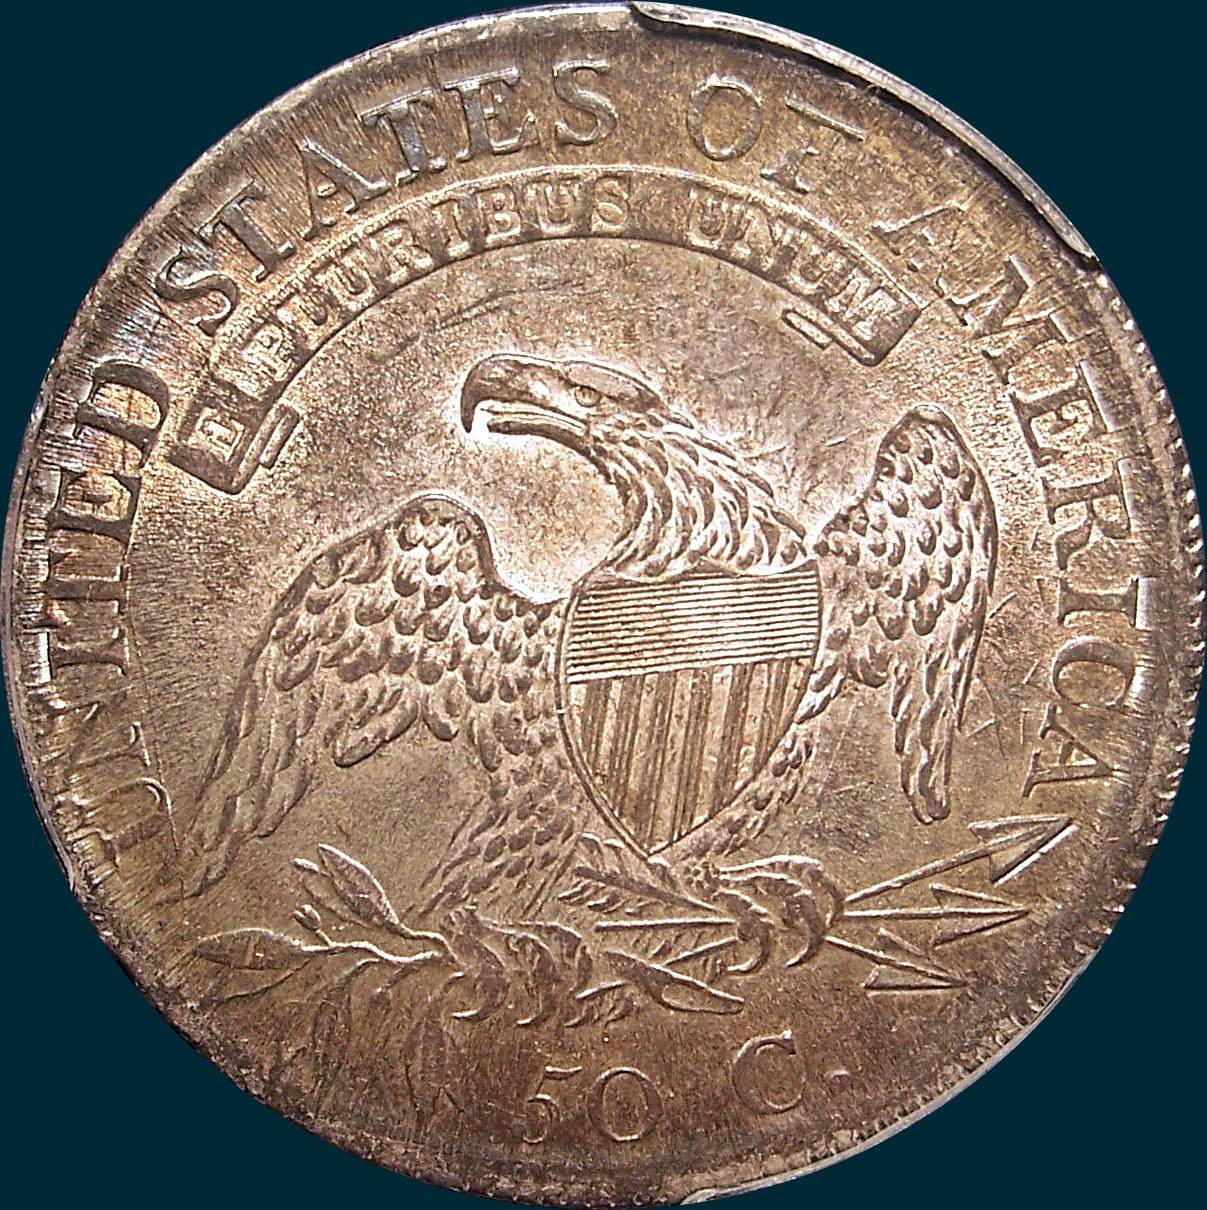 1811 o-108, small 8, capped bust half dollar